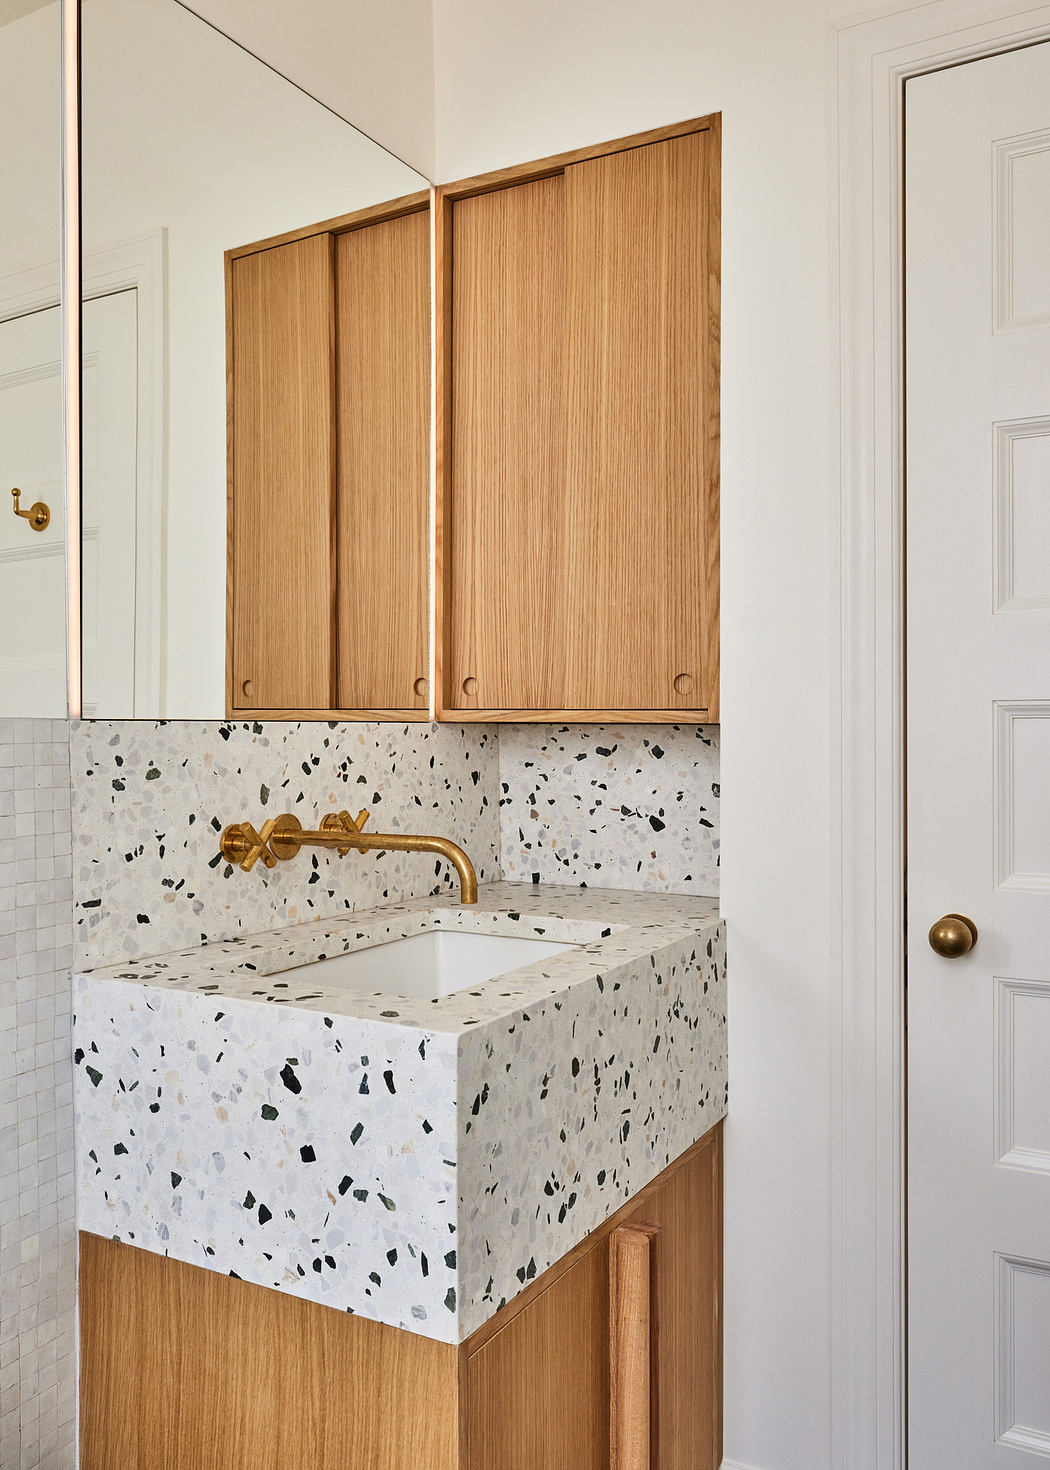 Modern bathroom with terrazzo sink and wooden cabinets.